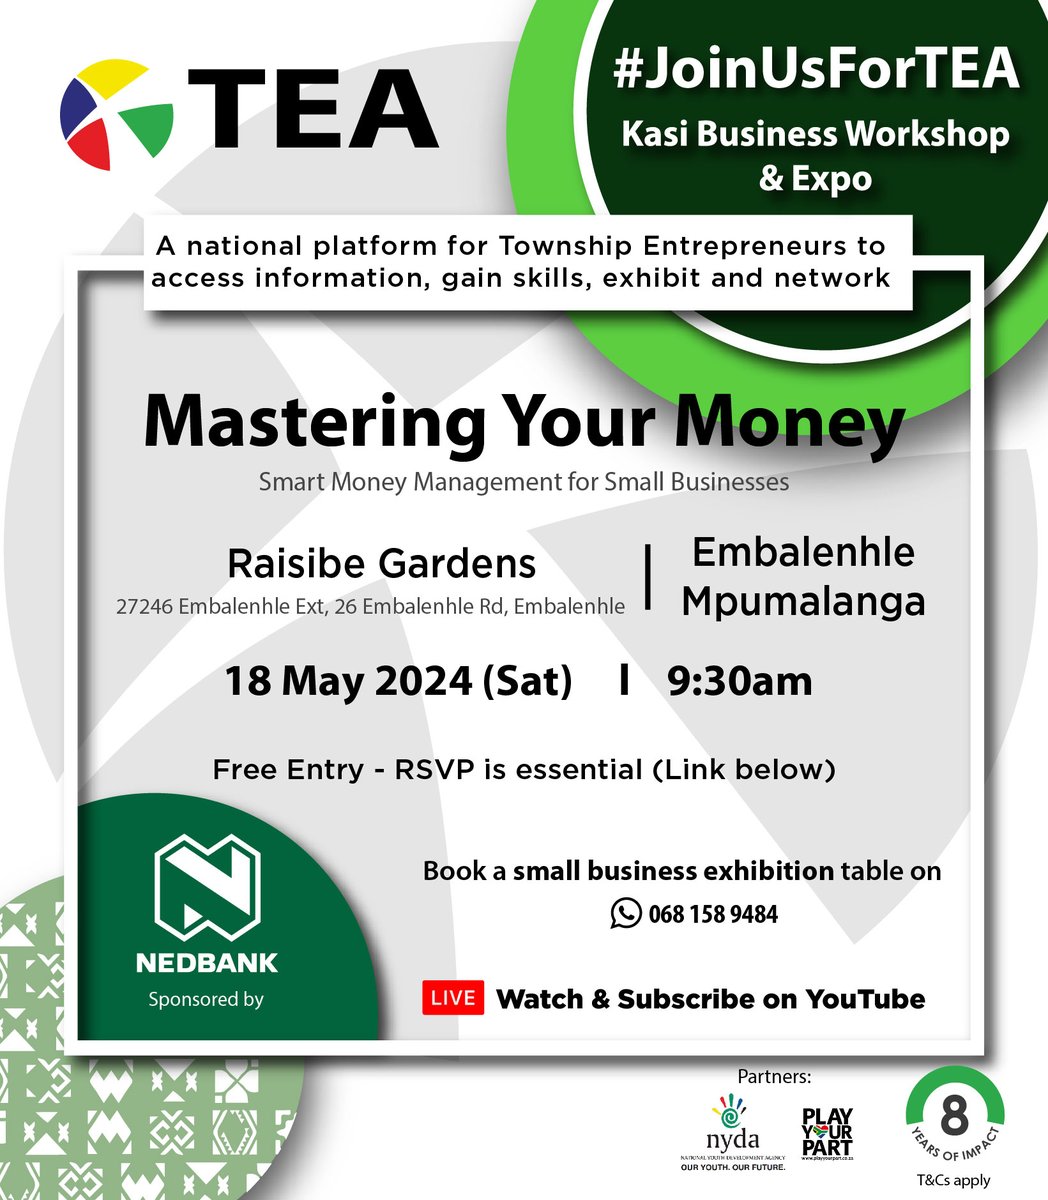 Attention Embalenhle Entrepreneurs🚨 #JoinUsForTEA at the Kasi Business Workshop and Expo in Embalenhle, Mpumalanga. Our theme is 'Mastering Your Money.' We will be delving into smart money management for small businesses. Money management skills are essential for growing your…